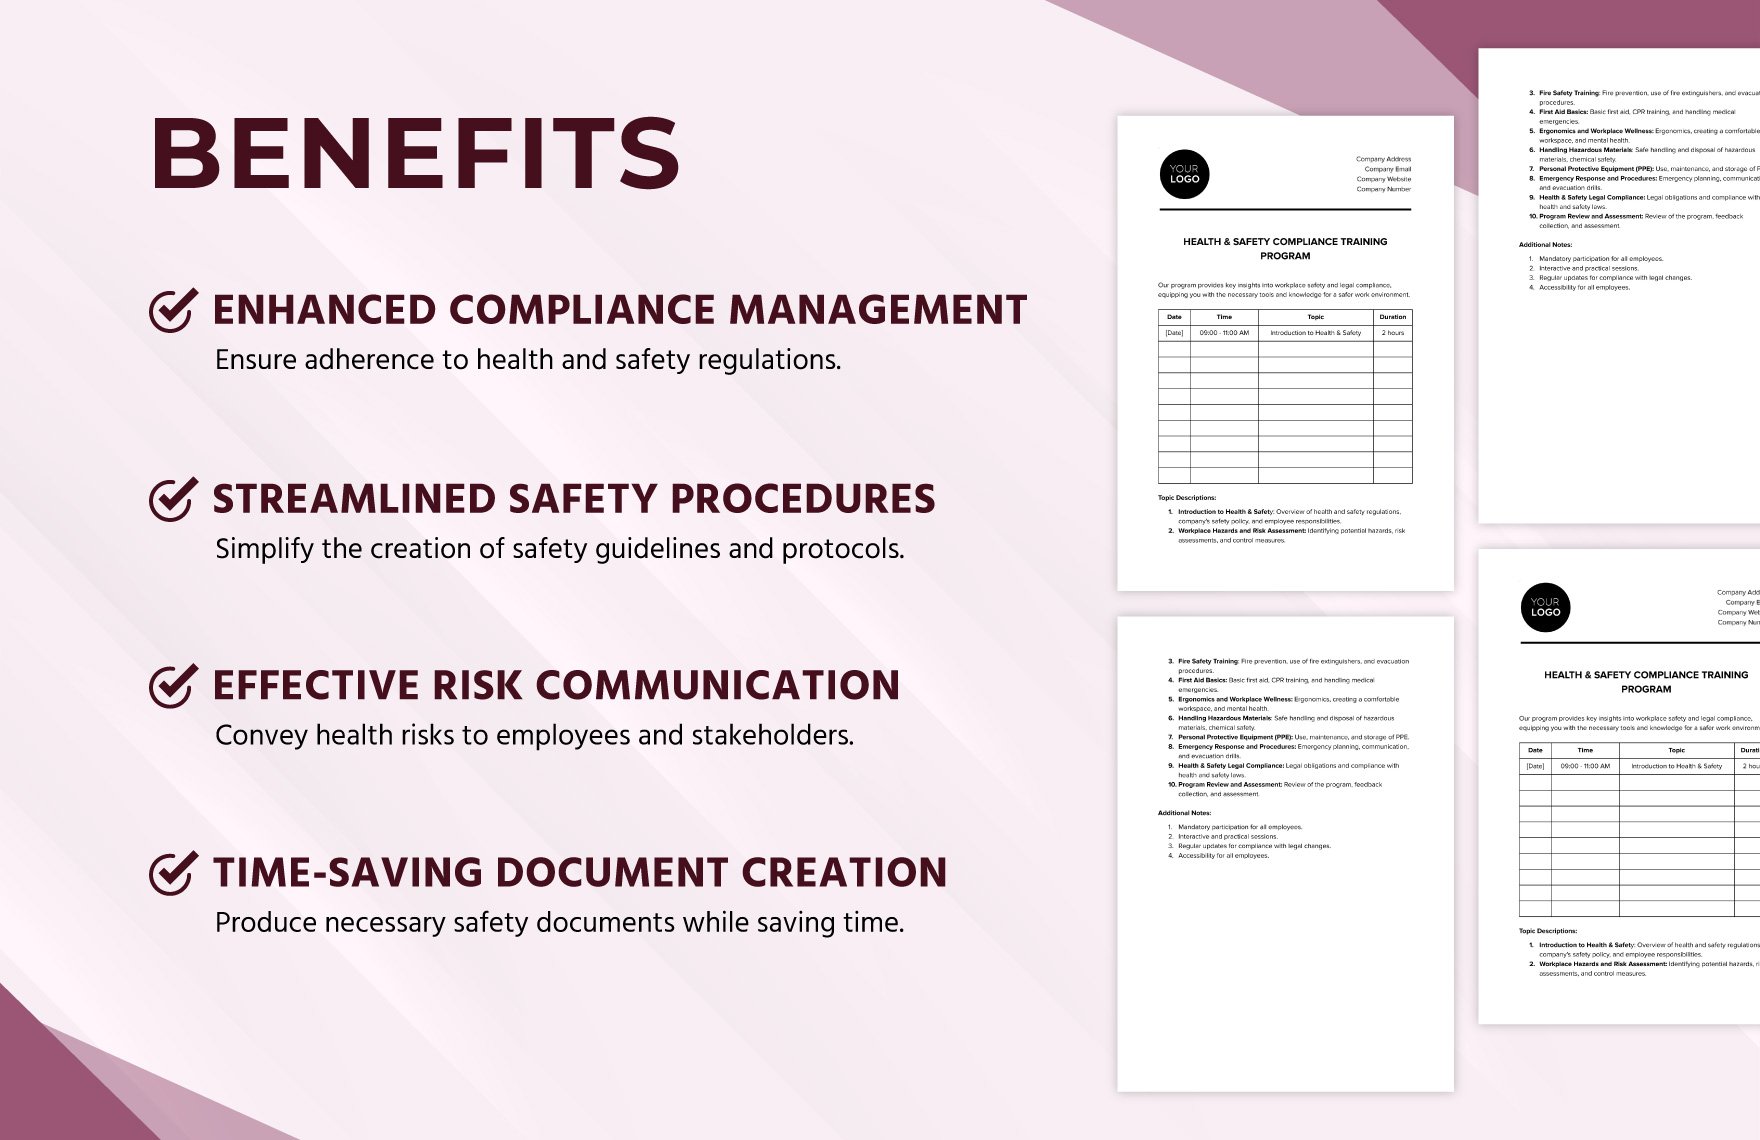 Health & Safety Compliance Training Program Template